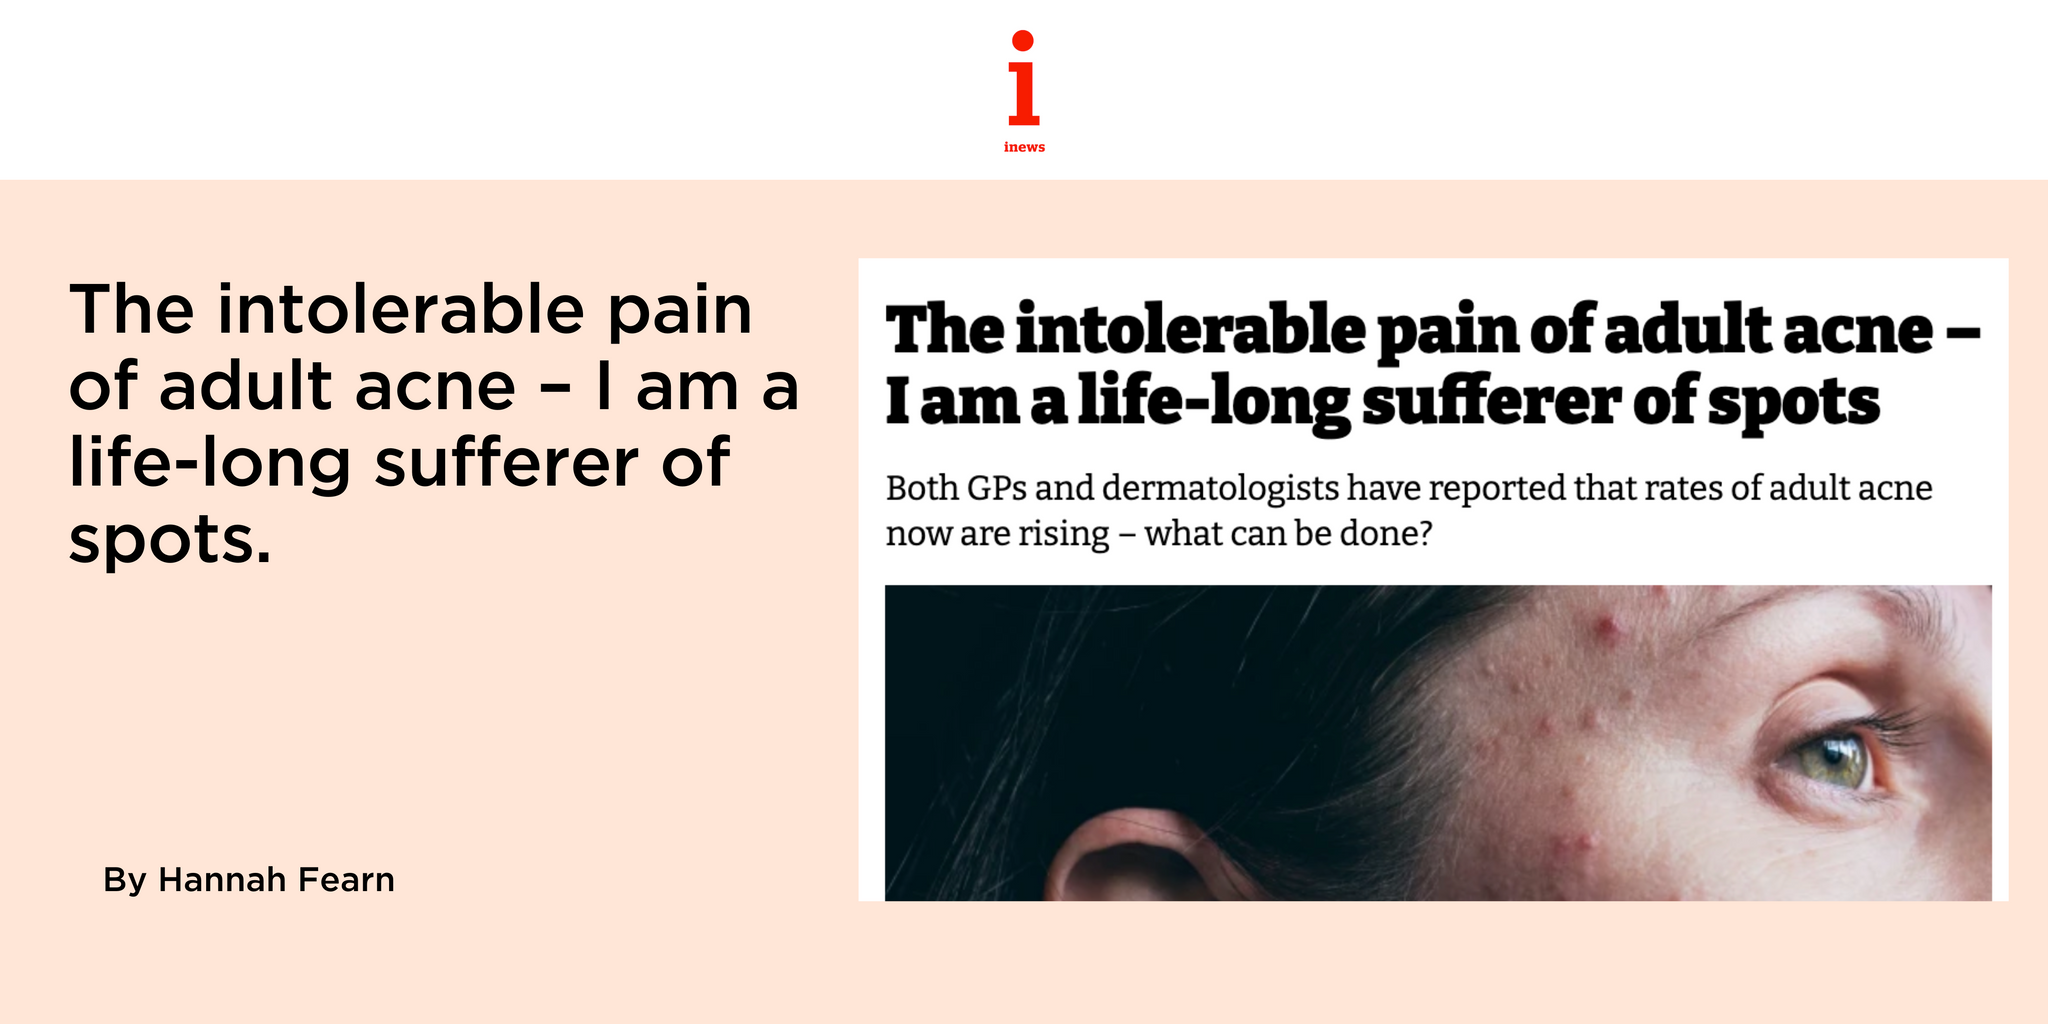 The intolerable pain of adult acne – I am a life-long sufferer of spots